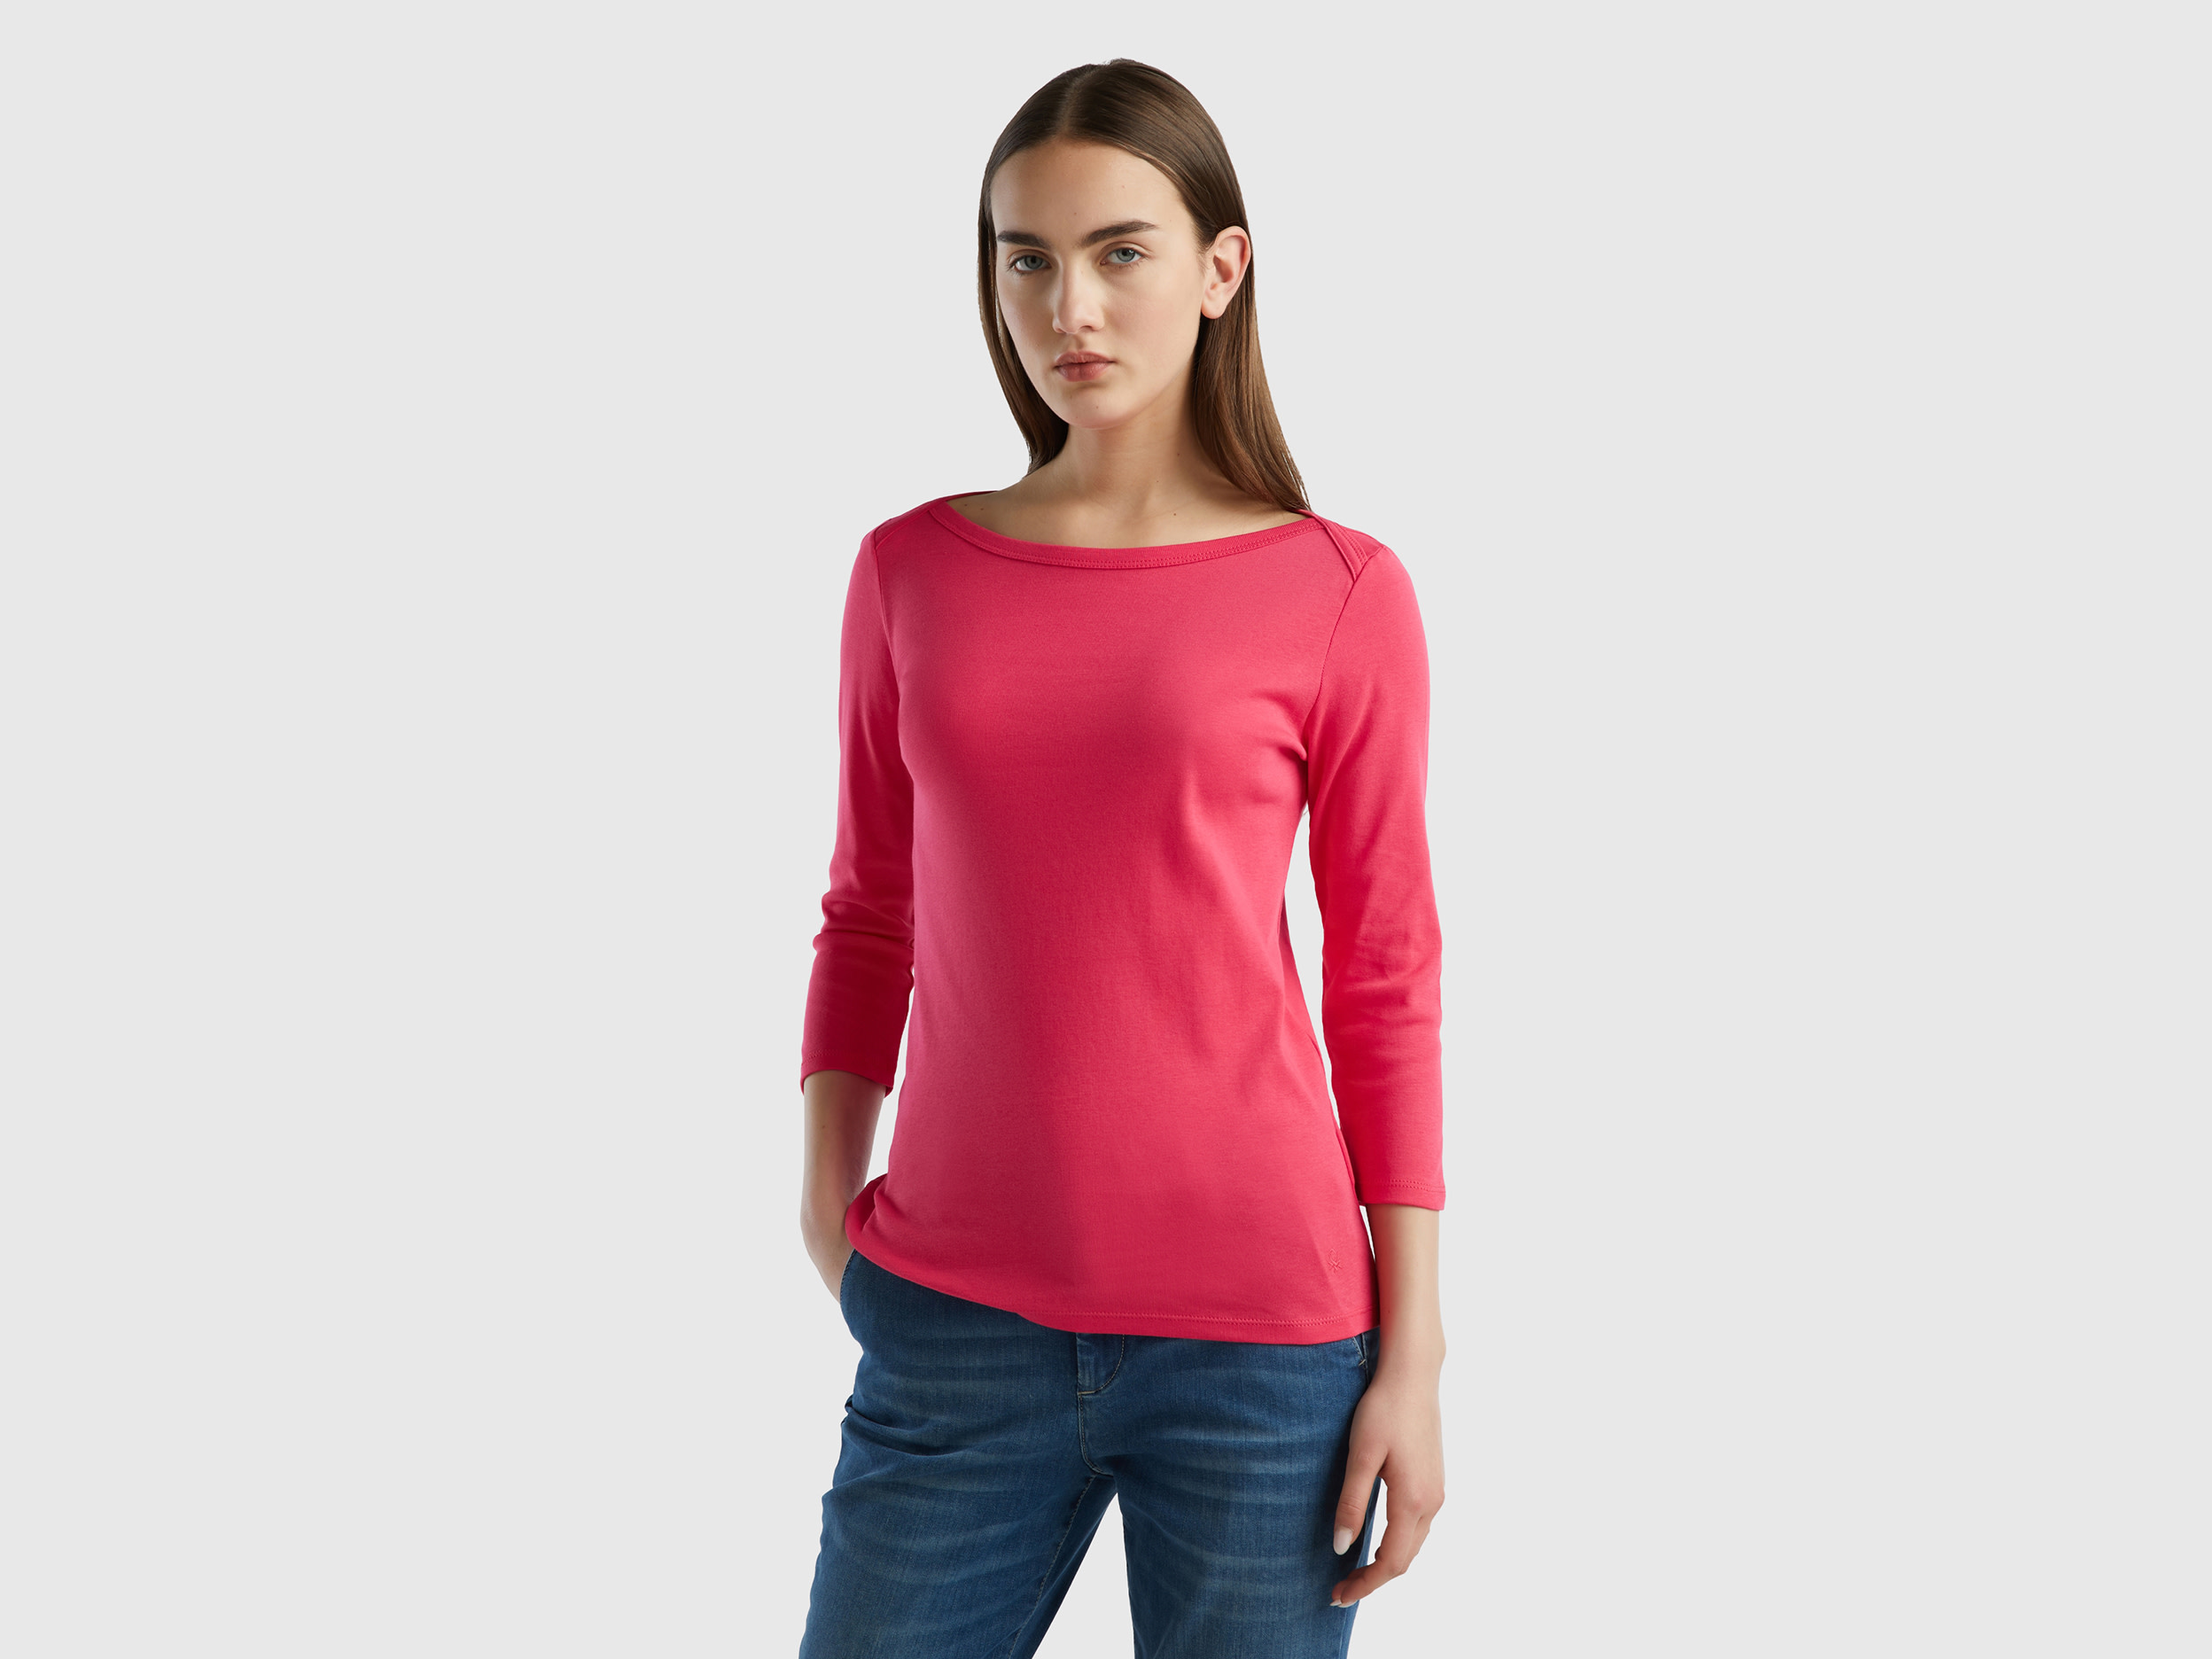 Benetton, T-shirt With Boat Neck In 100% Cotton, size S, Fuchsia, Women